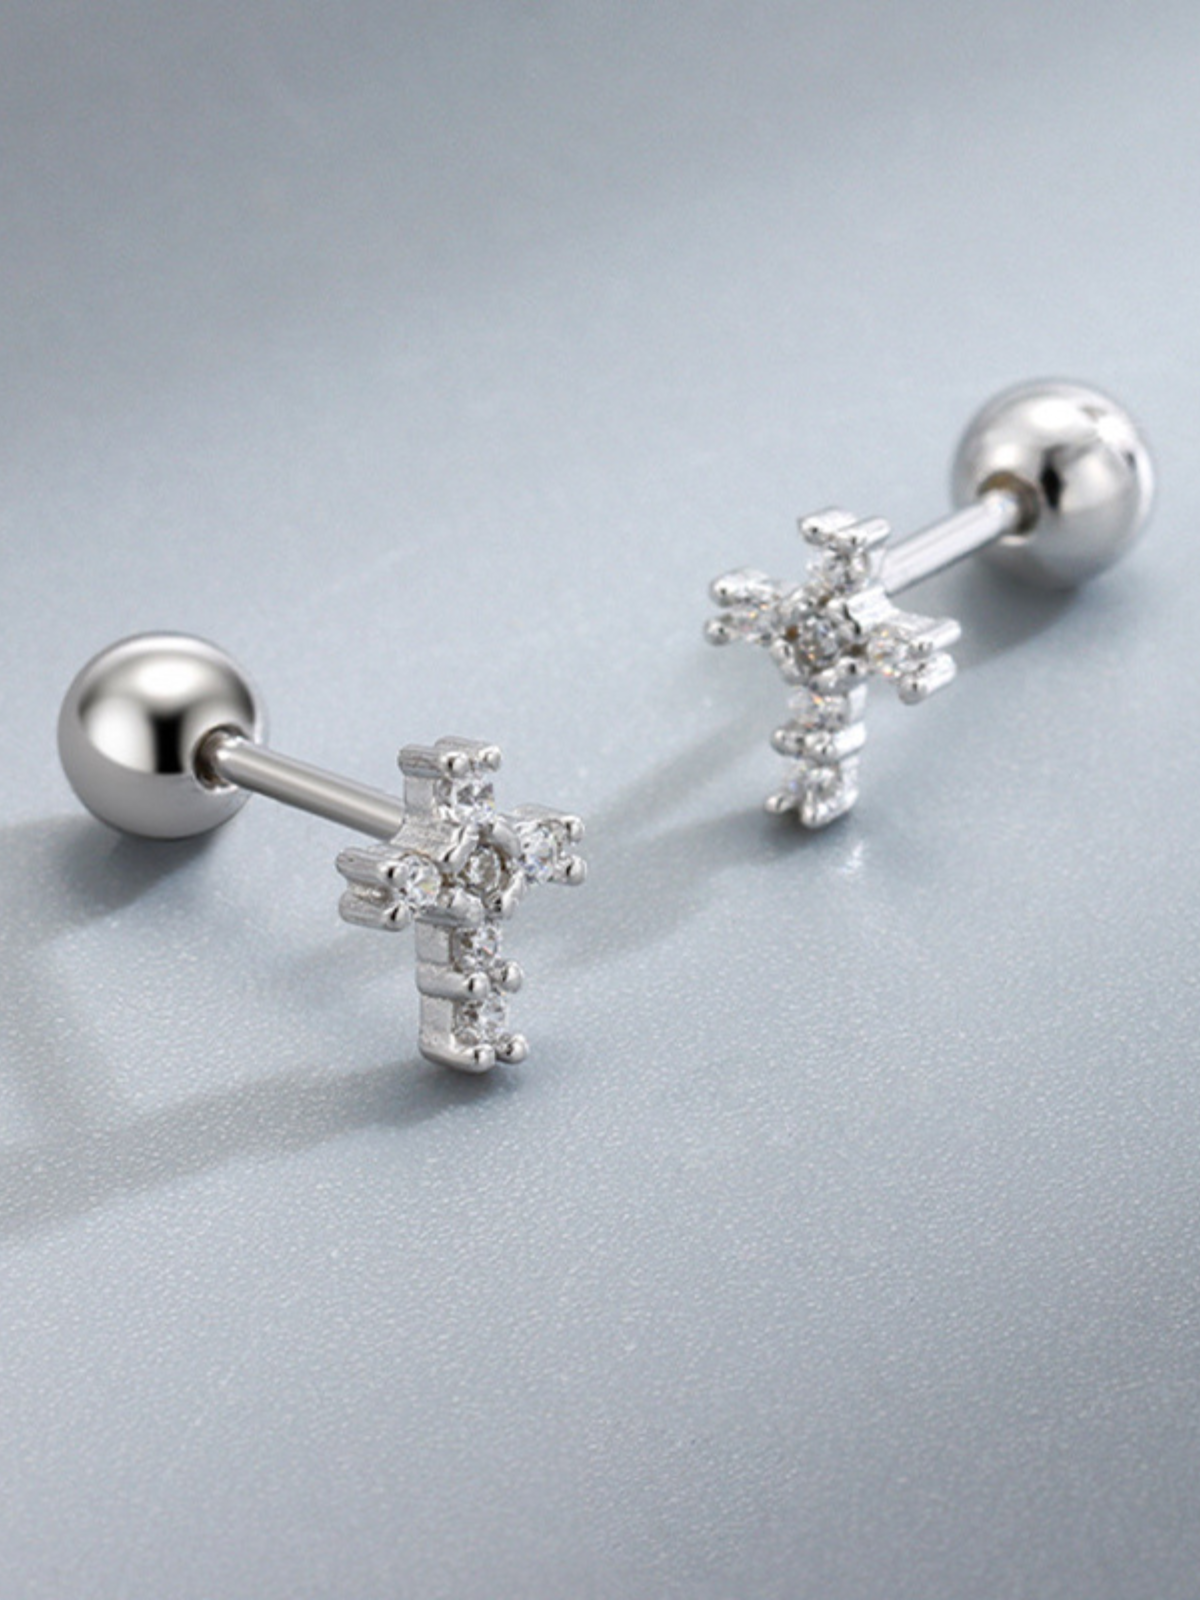 Girls Formal Accessories | Silver & Gold Jeweled Cross Earrings